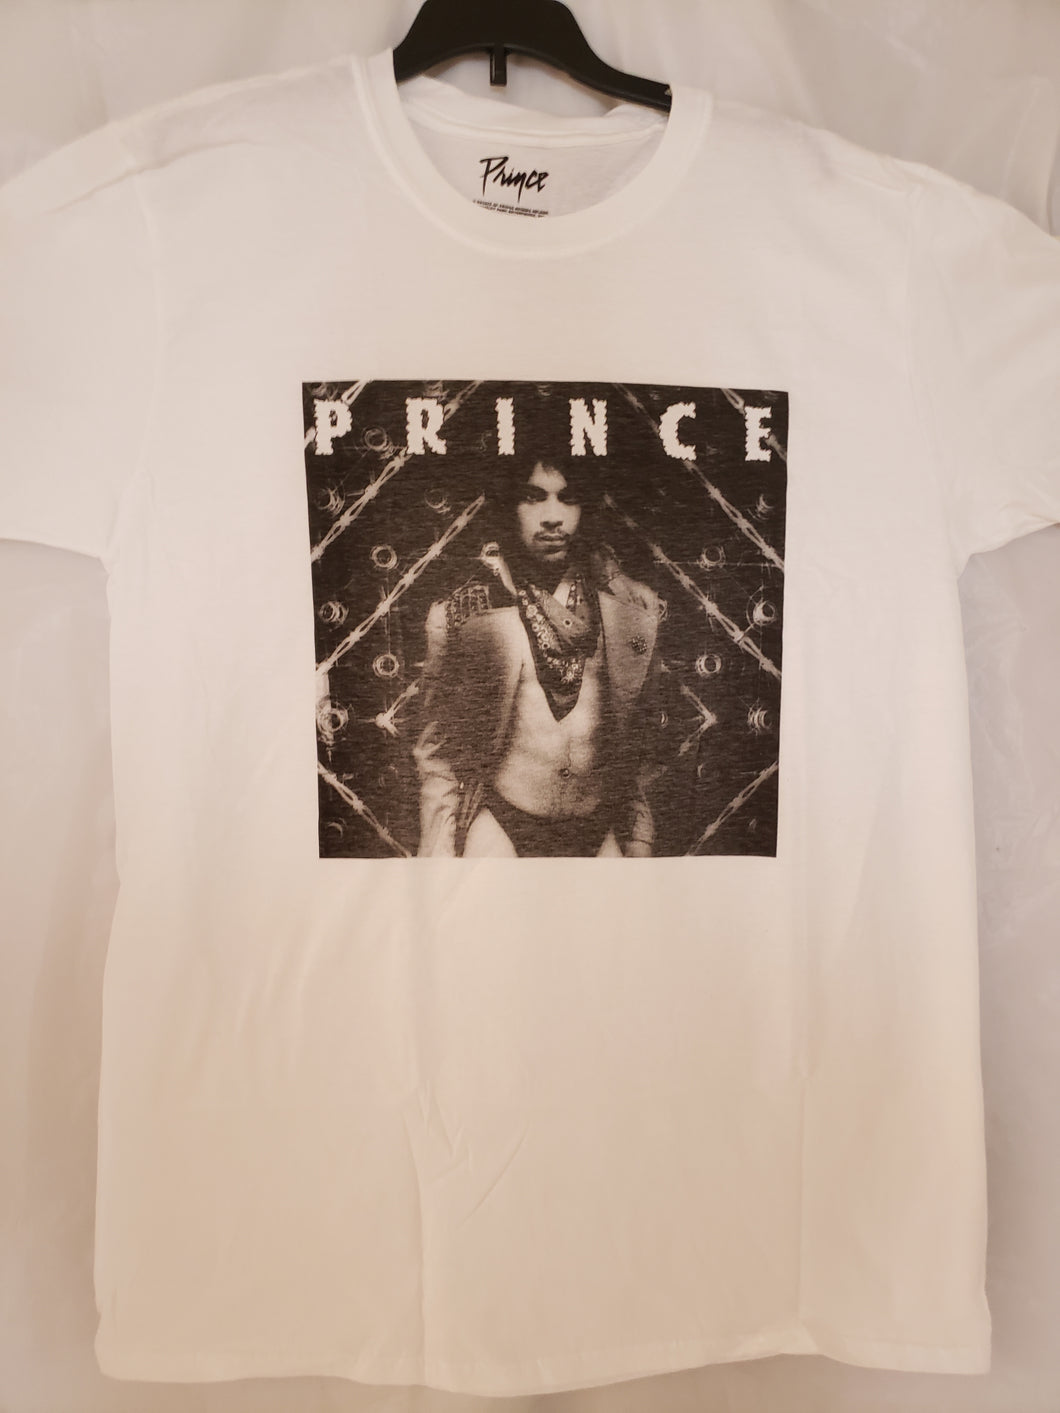 PRINCE T-SHIRT BRAND NEW EXTRA LARGE